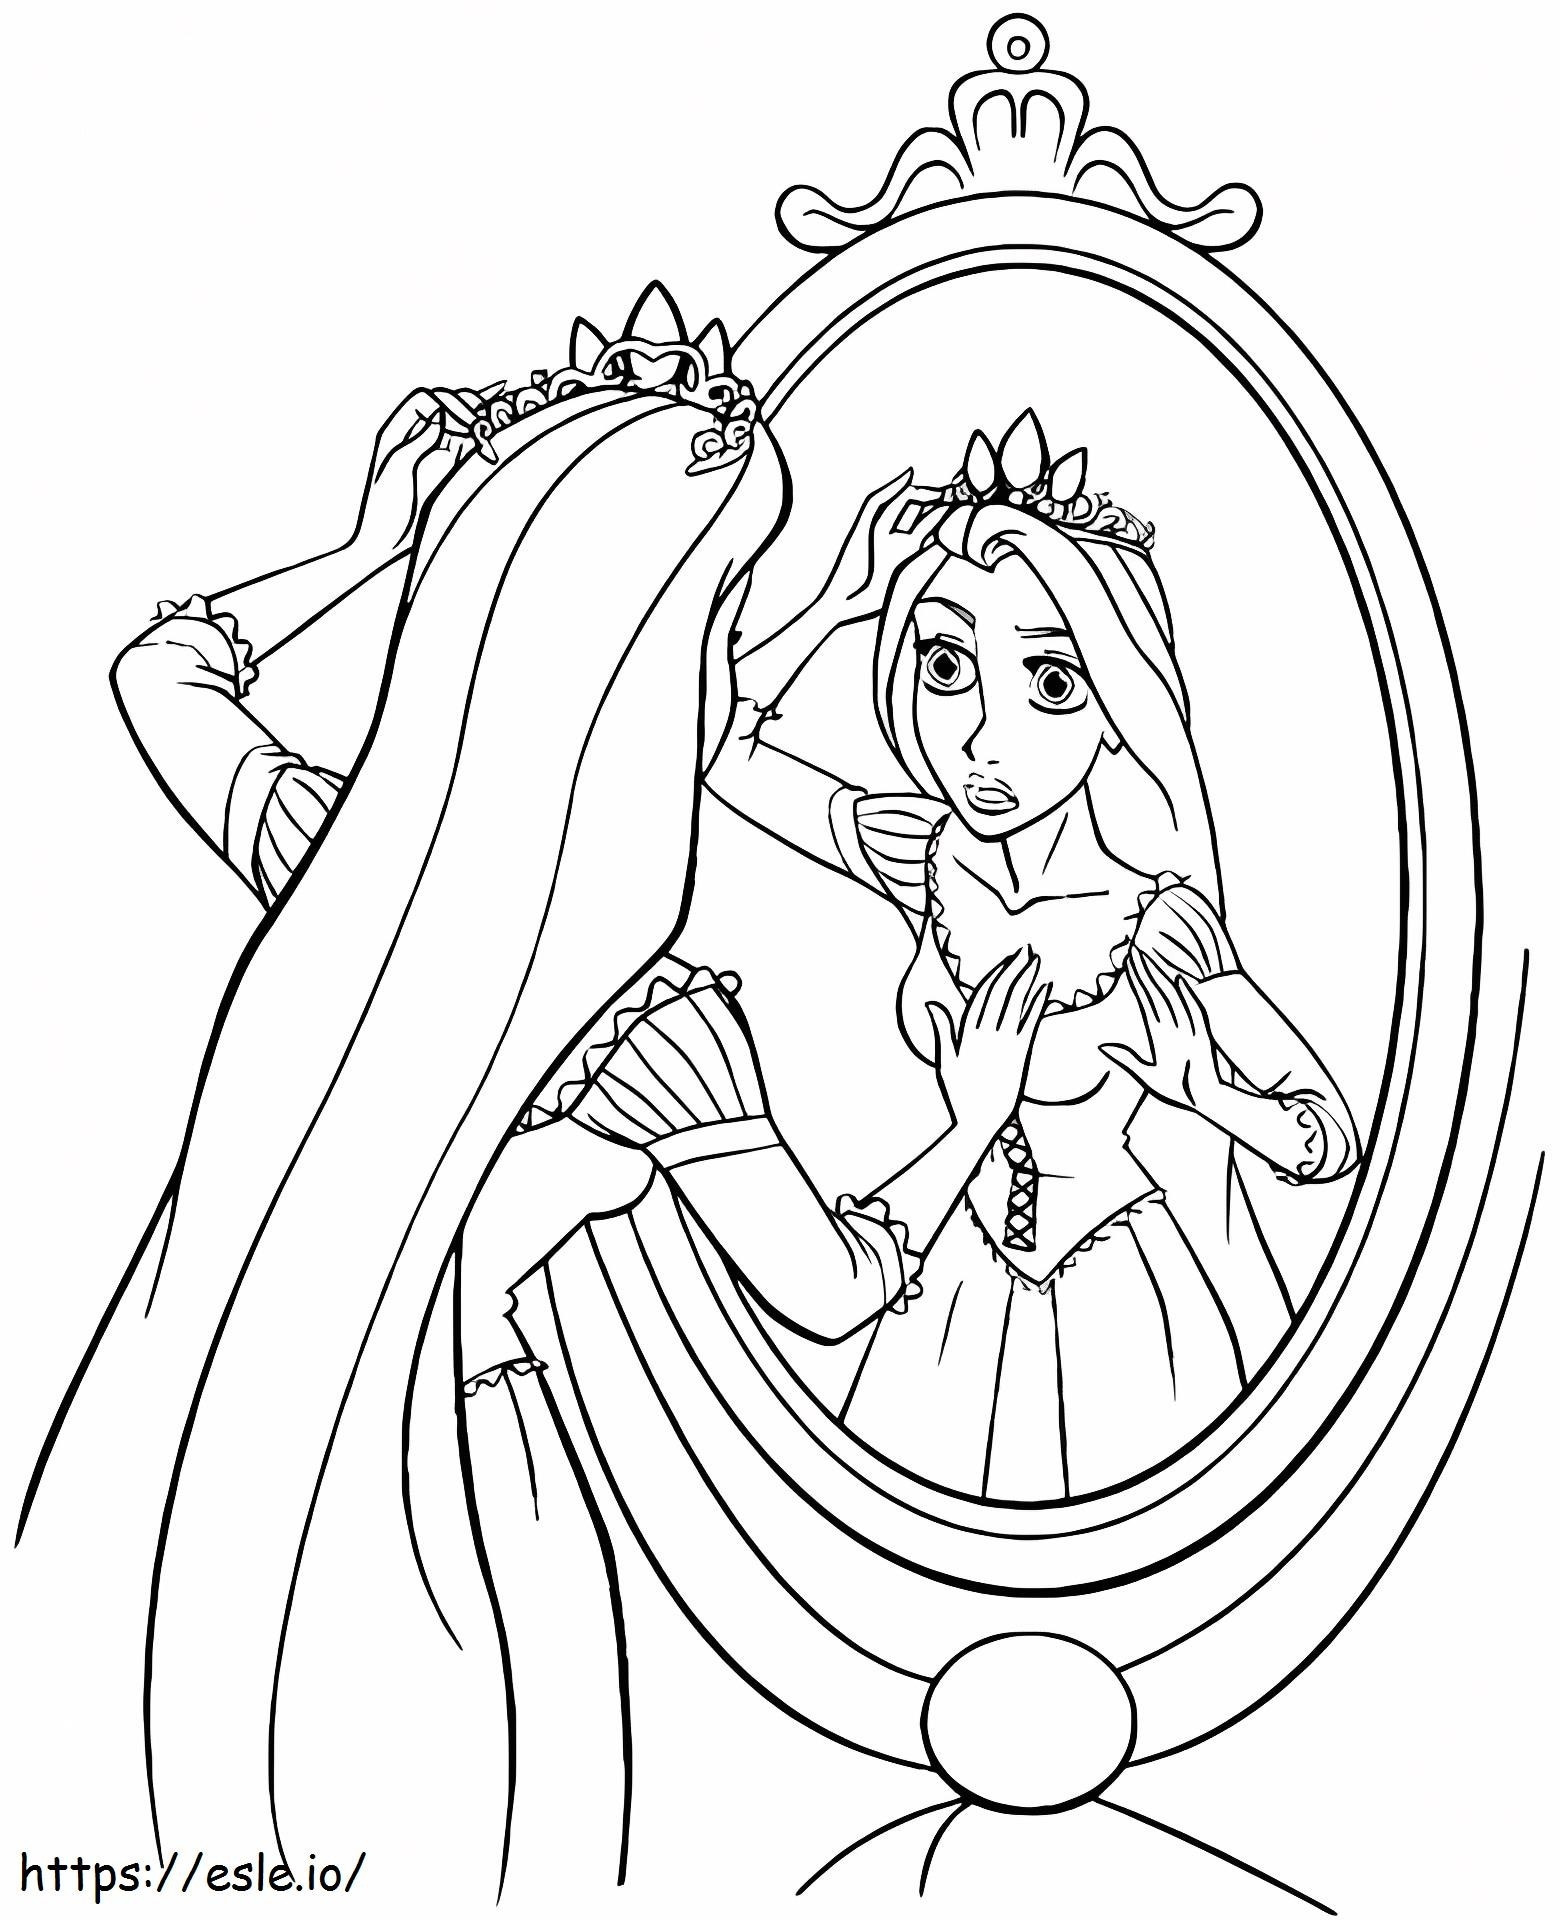 18-coloring-page